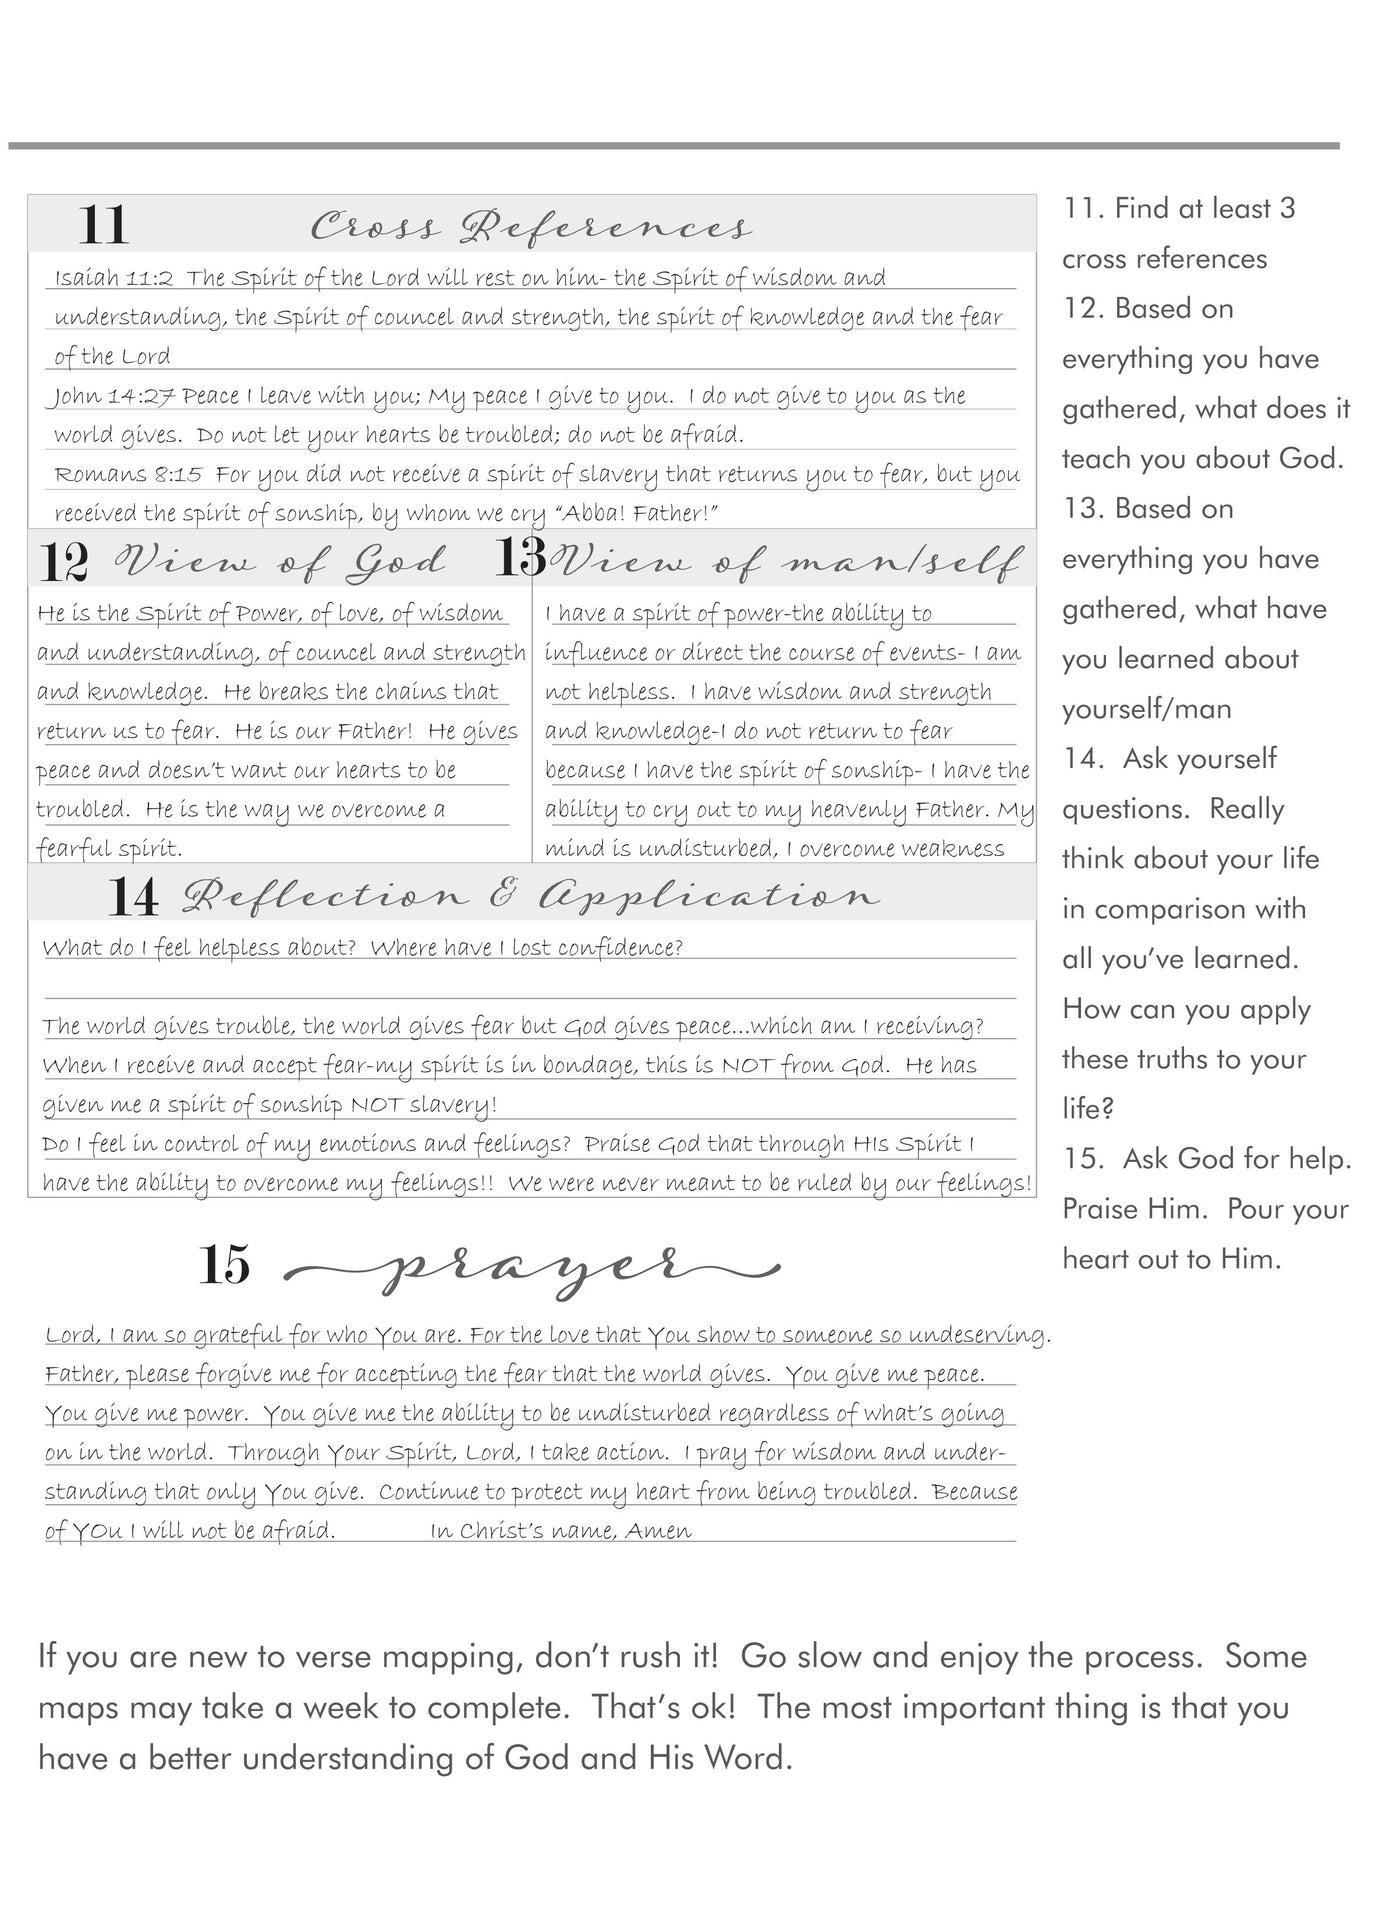 The James Method Download includes both instructional pages and the two-page verse mapping spread.